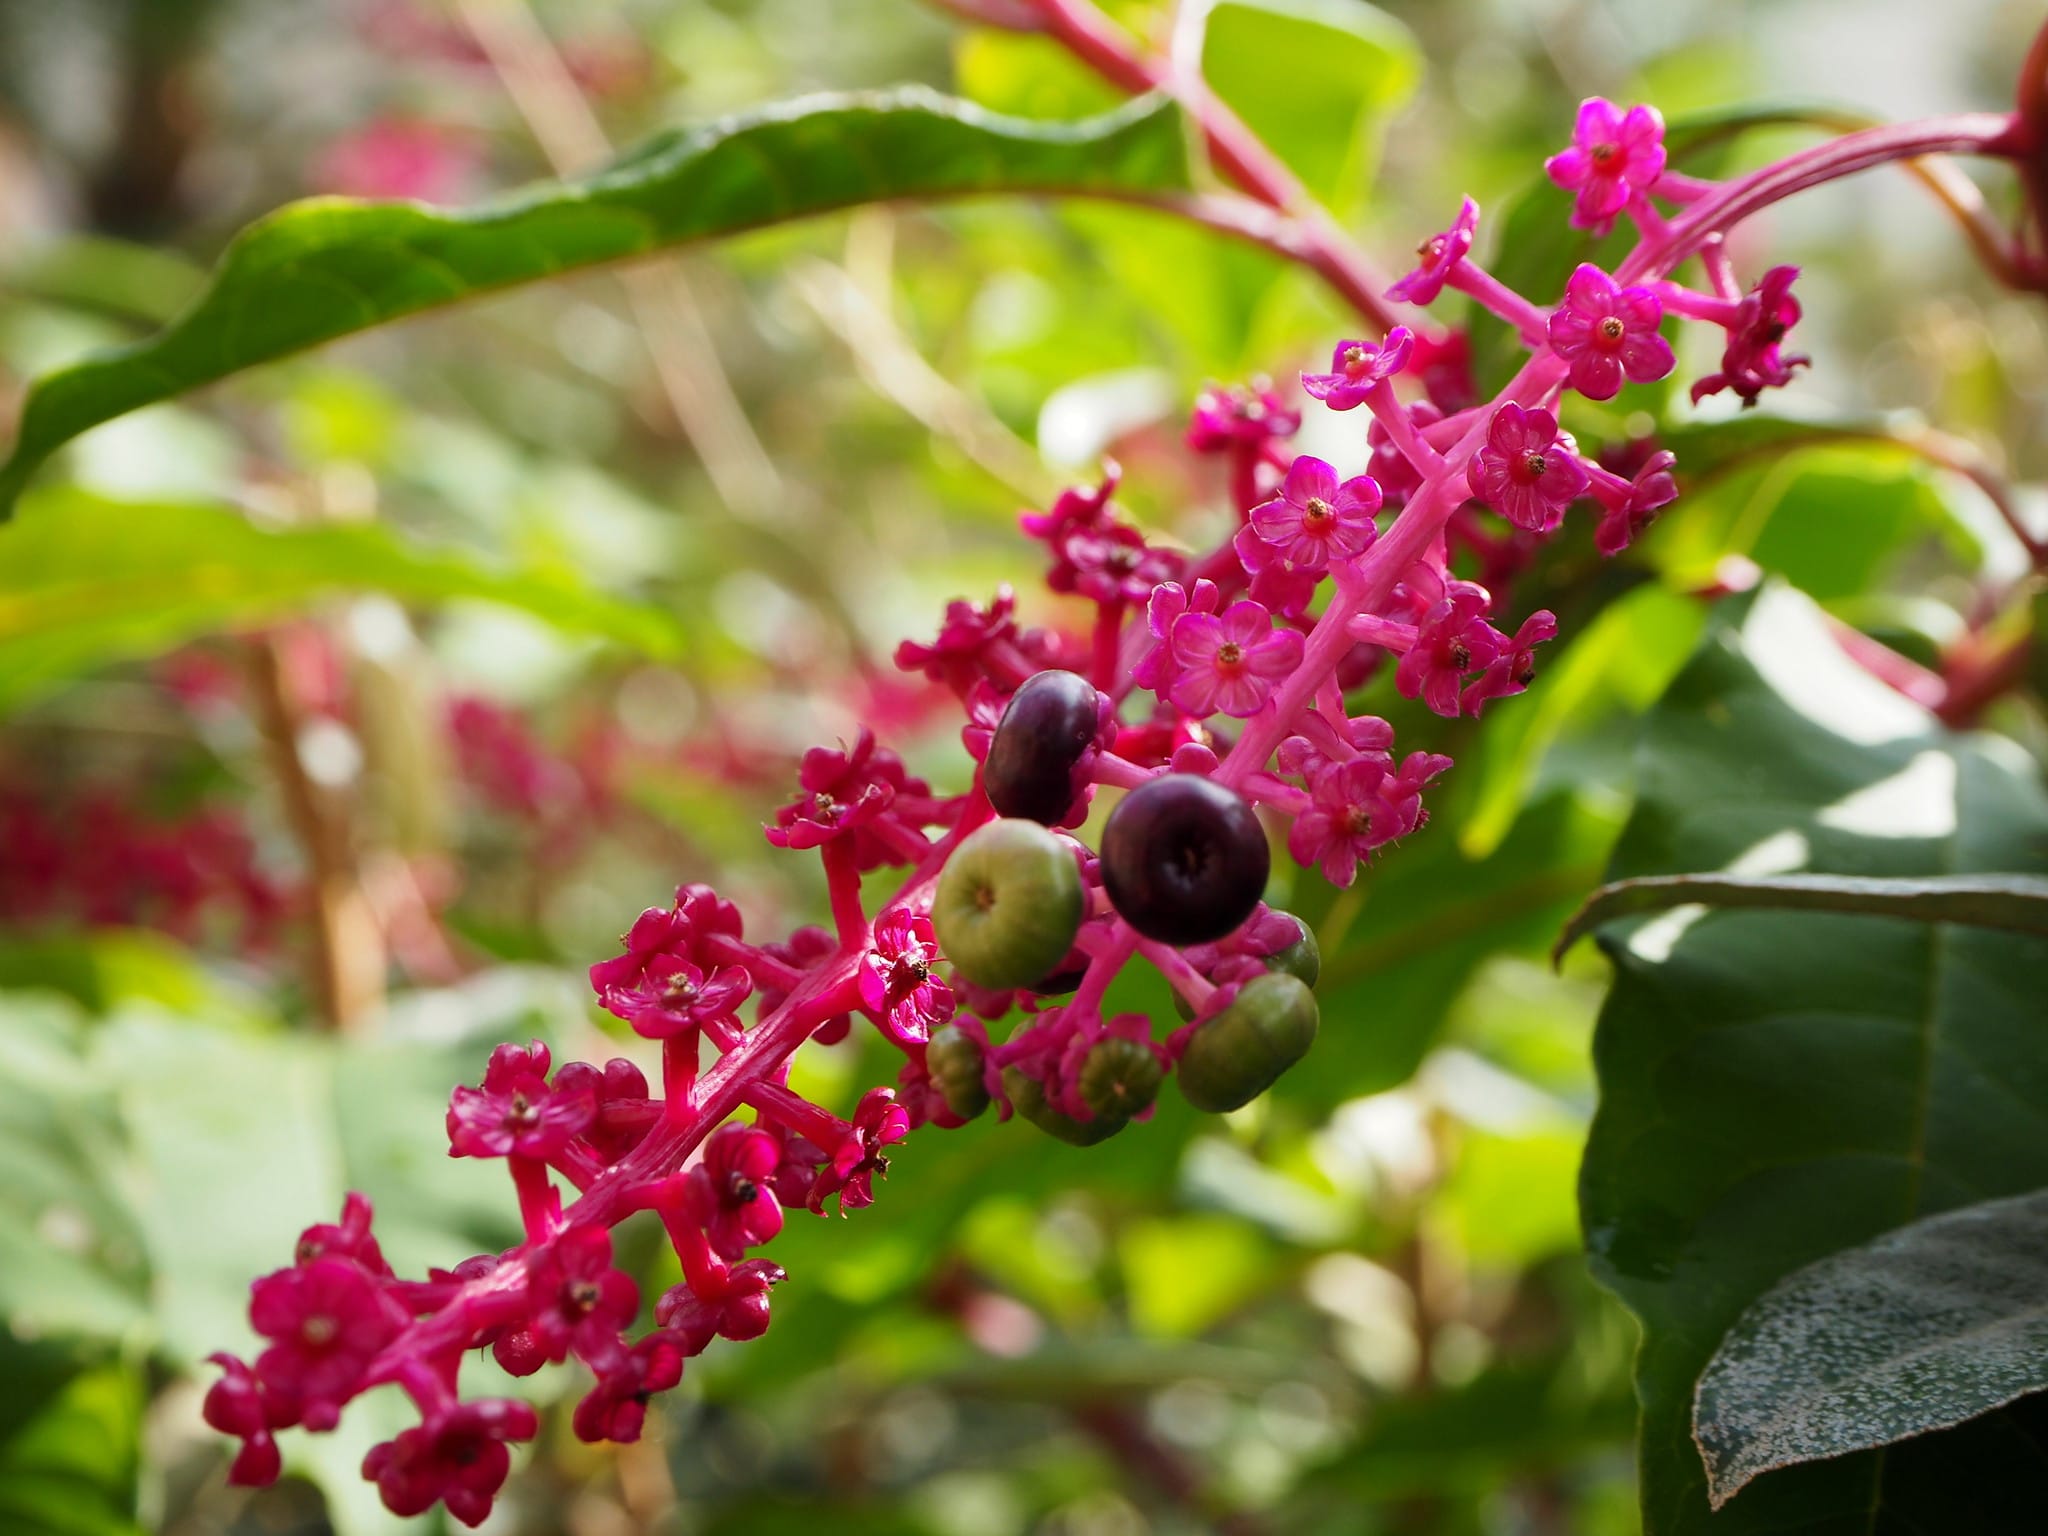 All about the Phytolacca | Gardening On